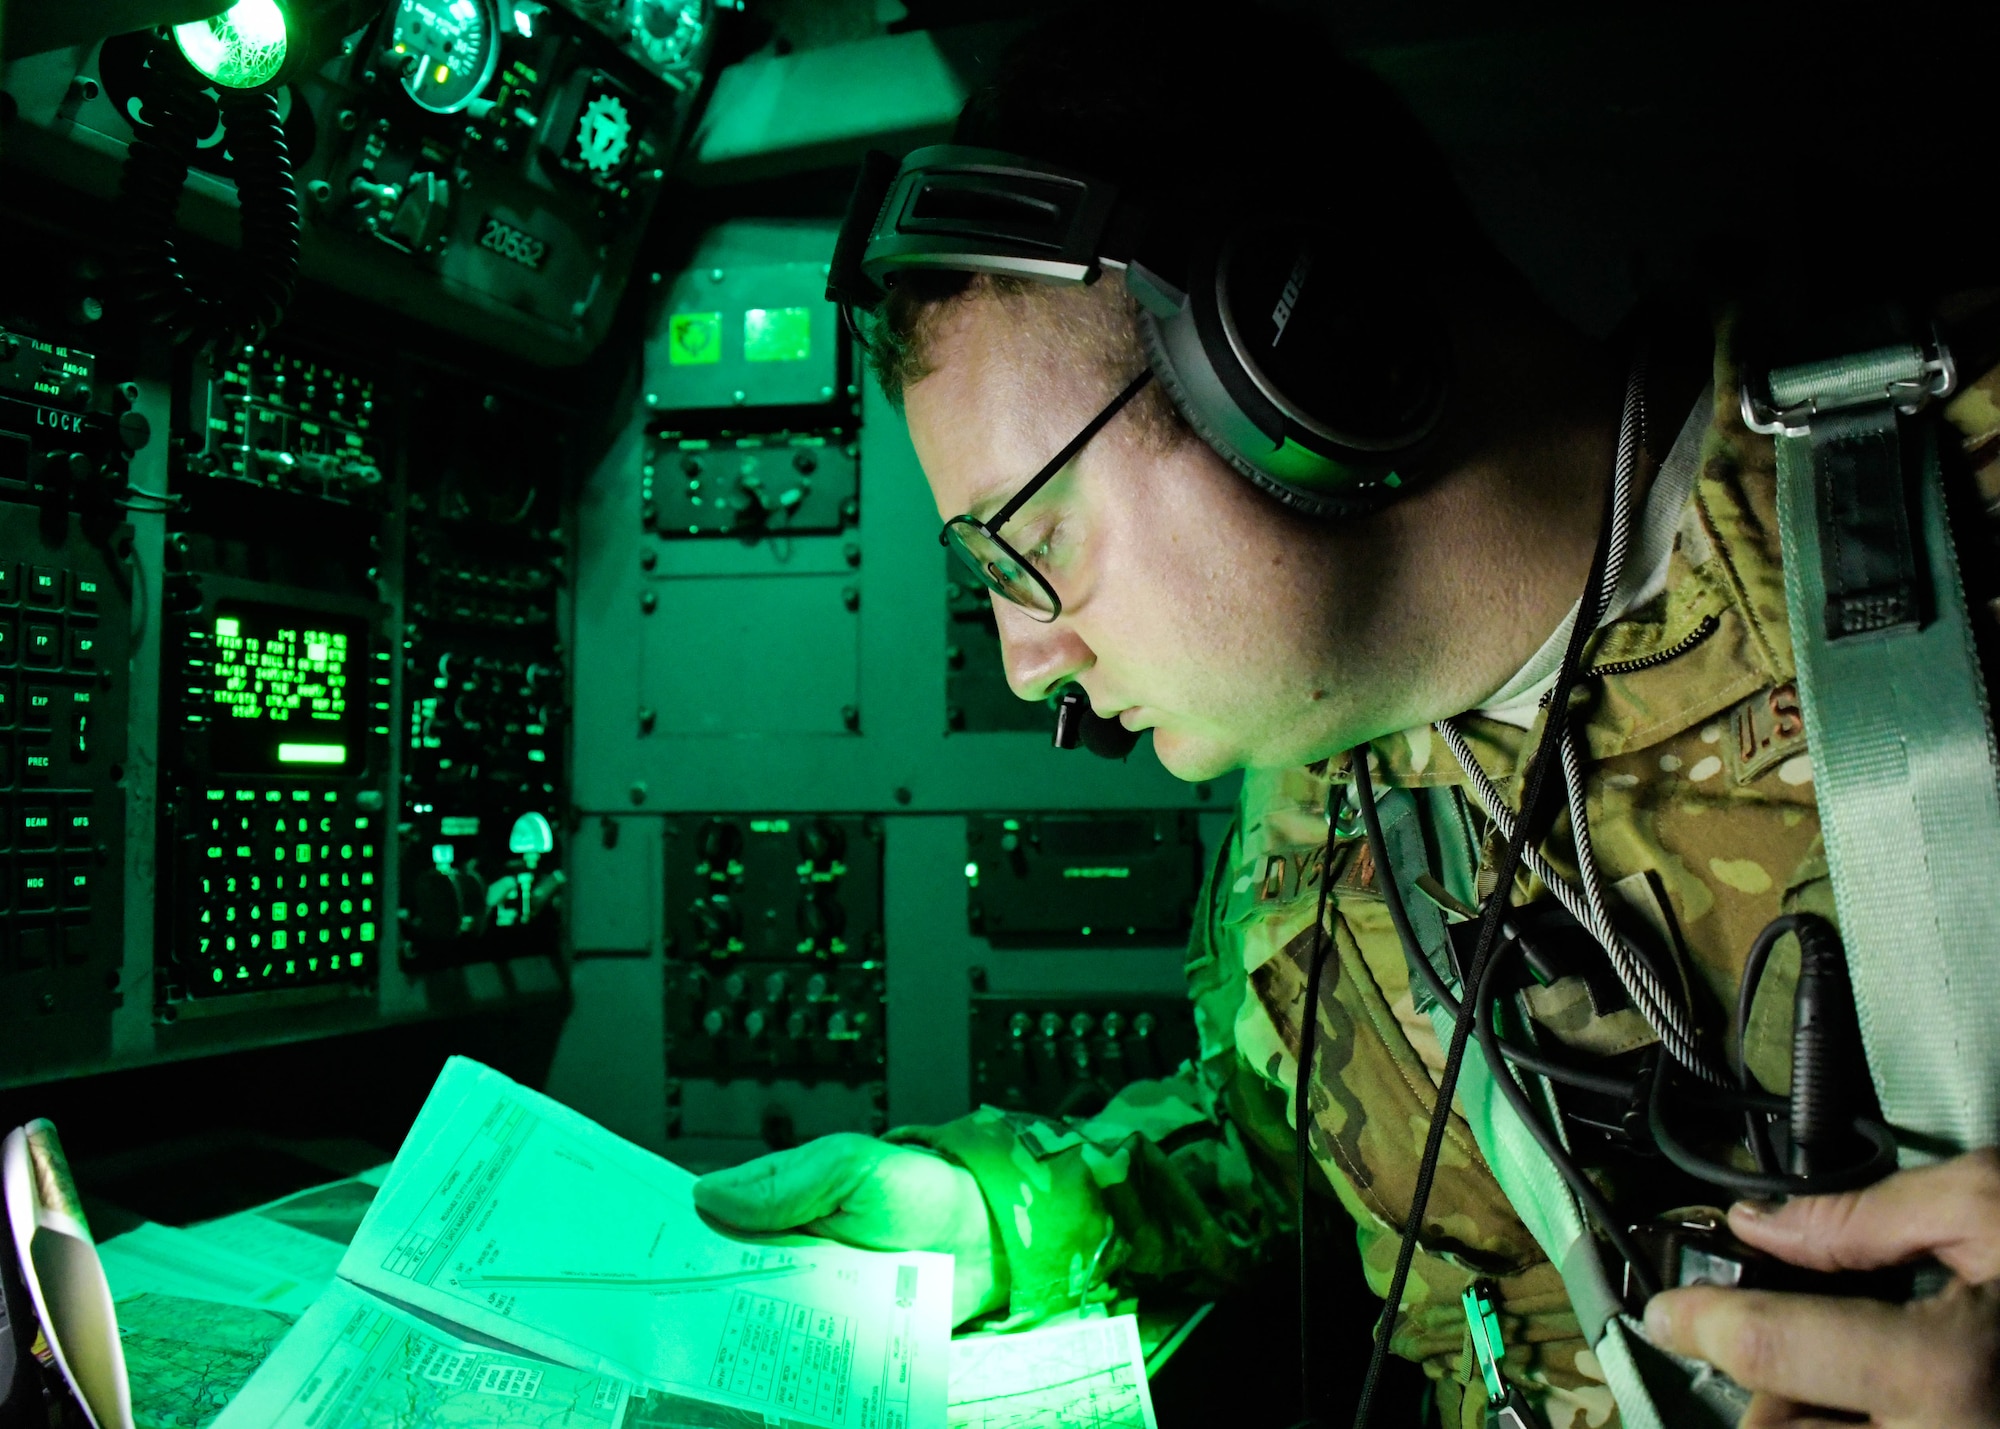 1st Lt. Patrick Dyson, a 700th Airlift Squadron navigator and mission planning cell member, navigates during a Night Tactical Air-Land mission during Exercise Real Thaw 2019 at Beja Air Base, Portugal, Oct. 2, 2019. Real Thaw is a Portuguese-led large joint and combined force exercise held annually where Dobbins provided aerial support. (U.S. Air Force photo/Senior Airman Josh Kincaid)